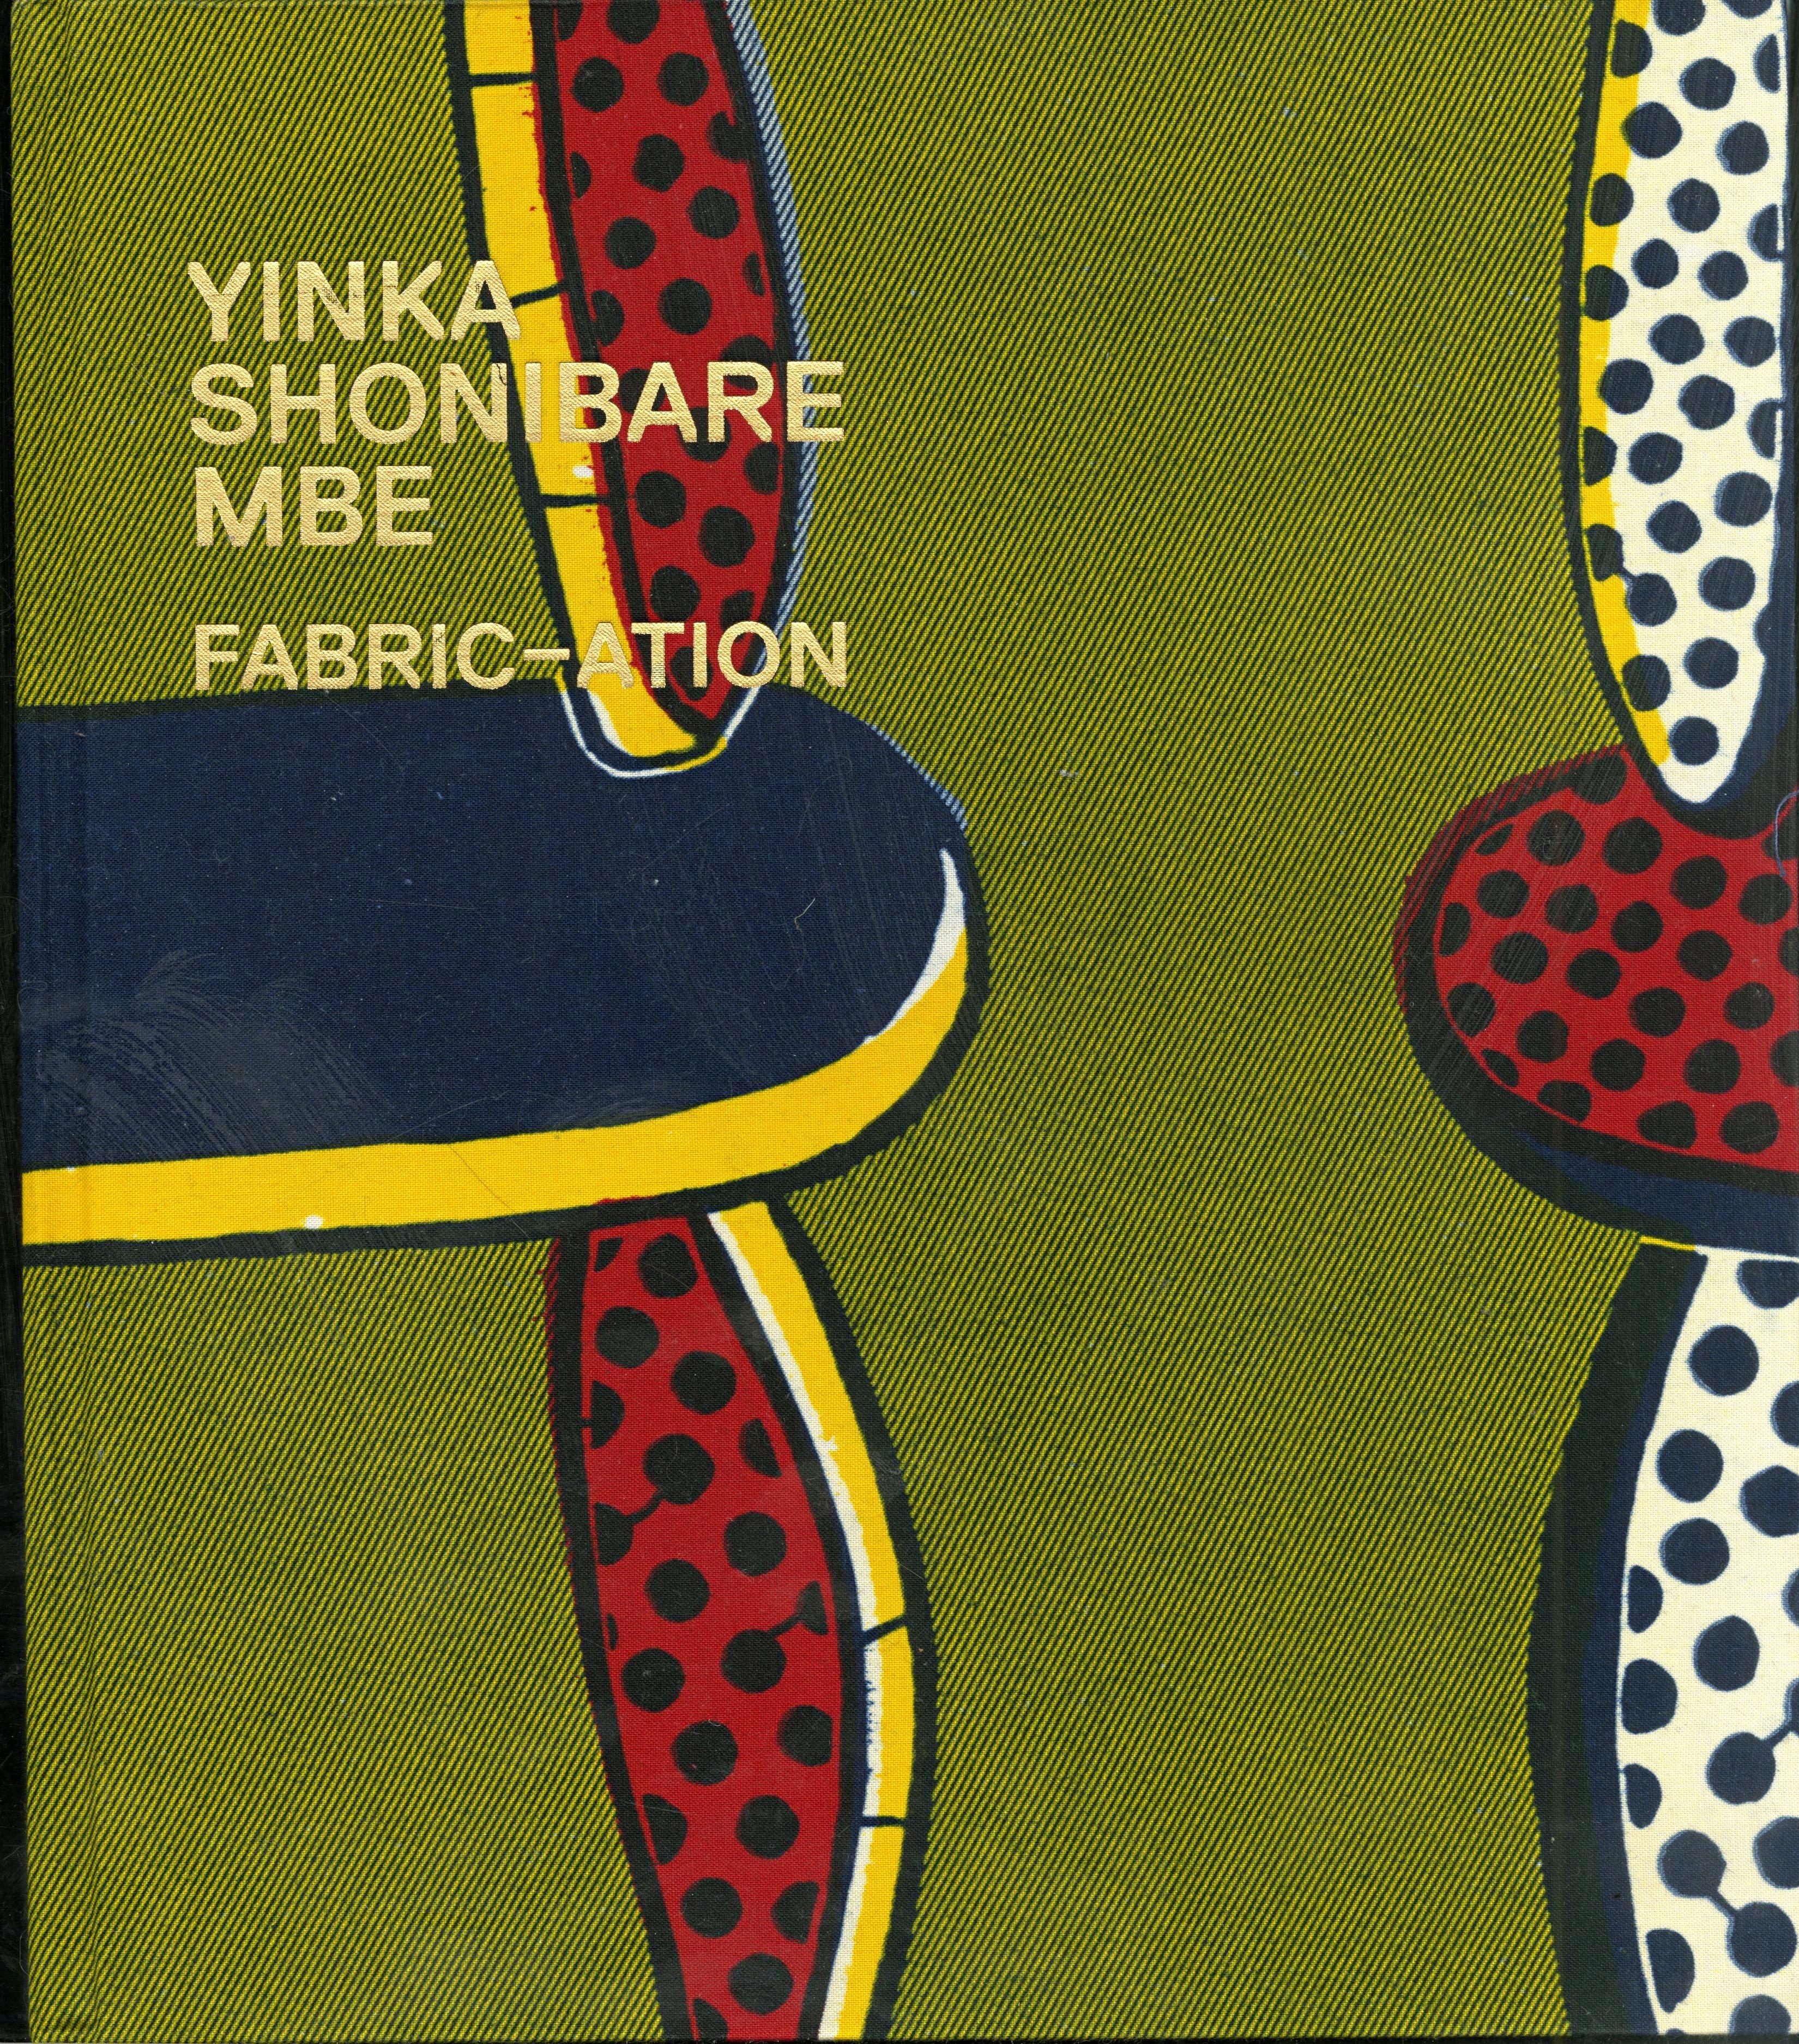 Fabric-ation, signed monograph w/ hand made fabric covered boards 21/50 (unique) - Contemporary Mixed Media Art by Yinka Shonibare